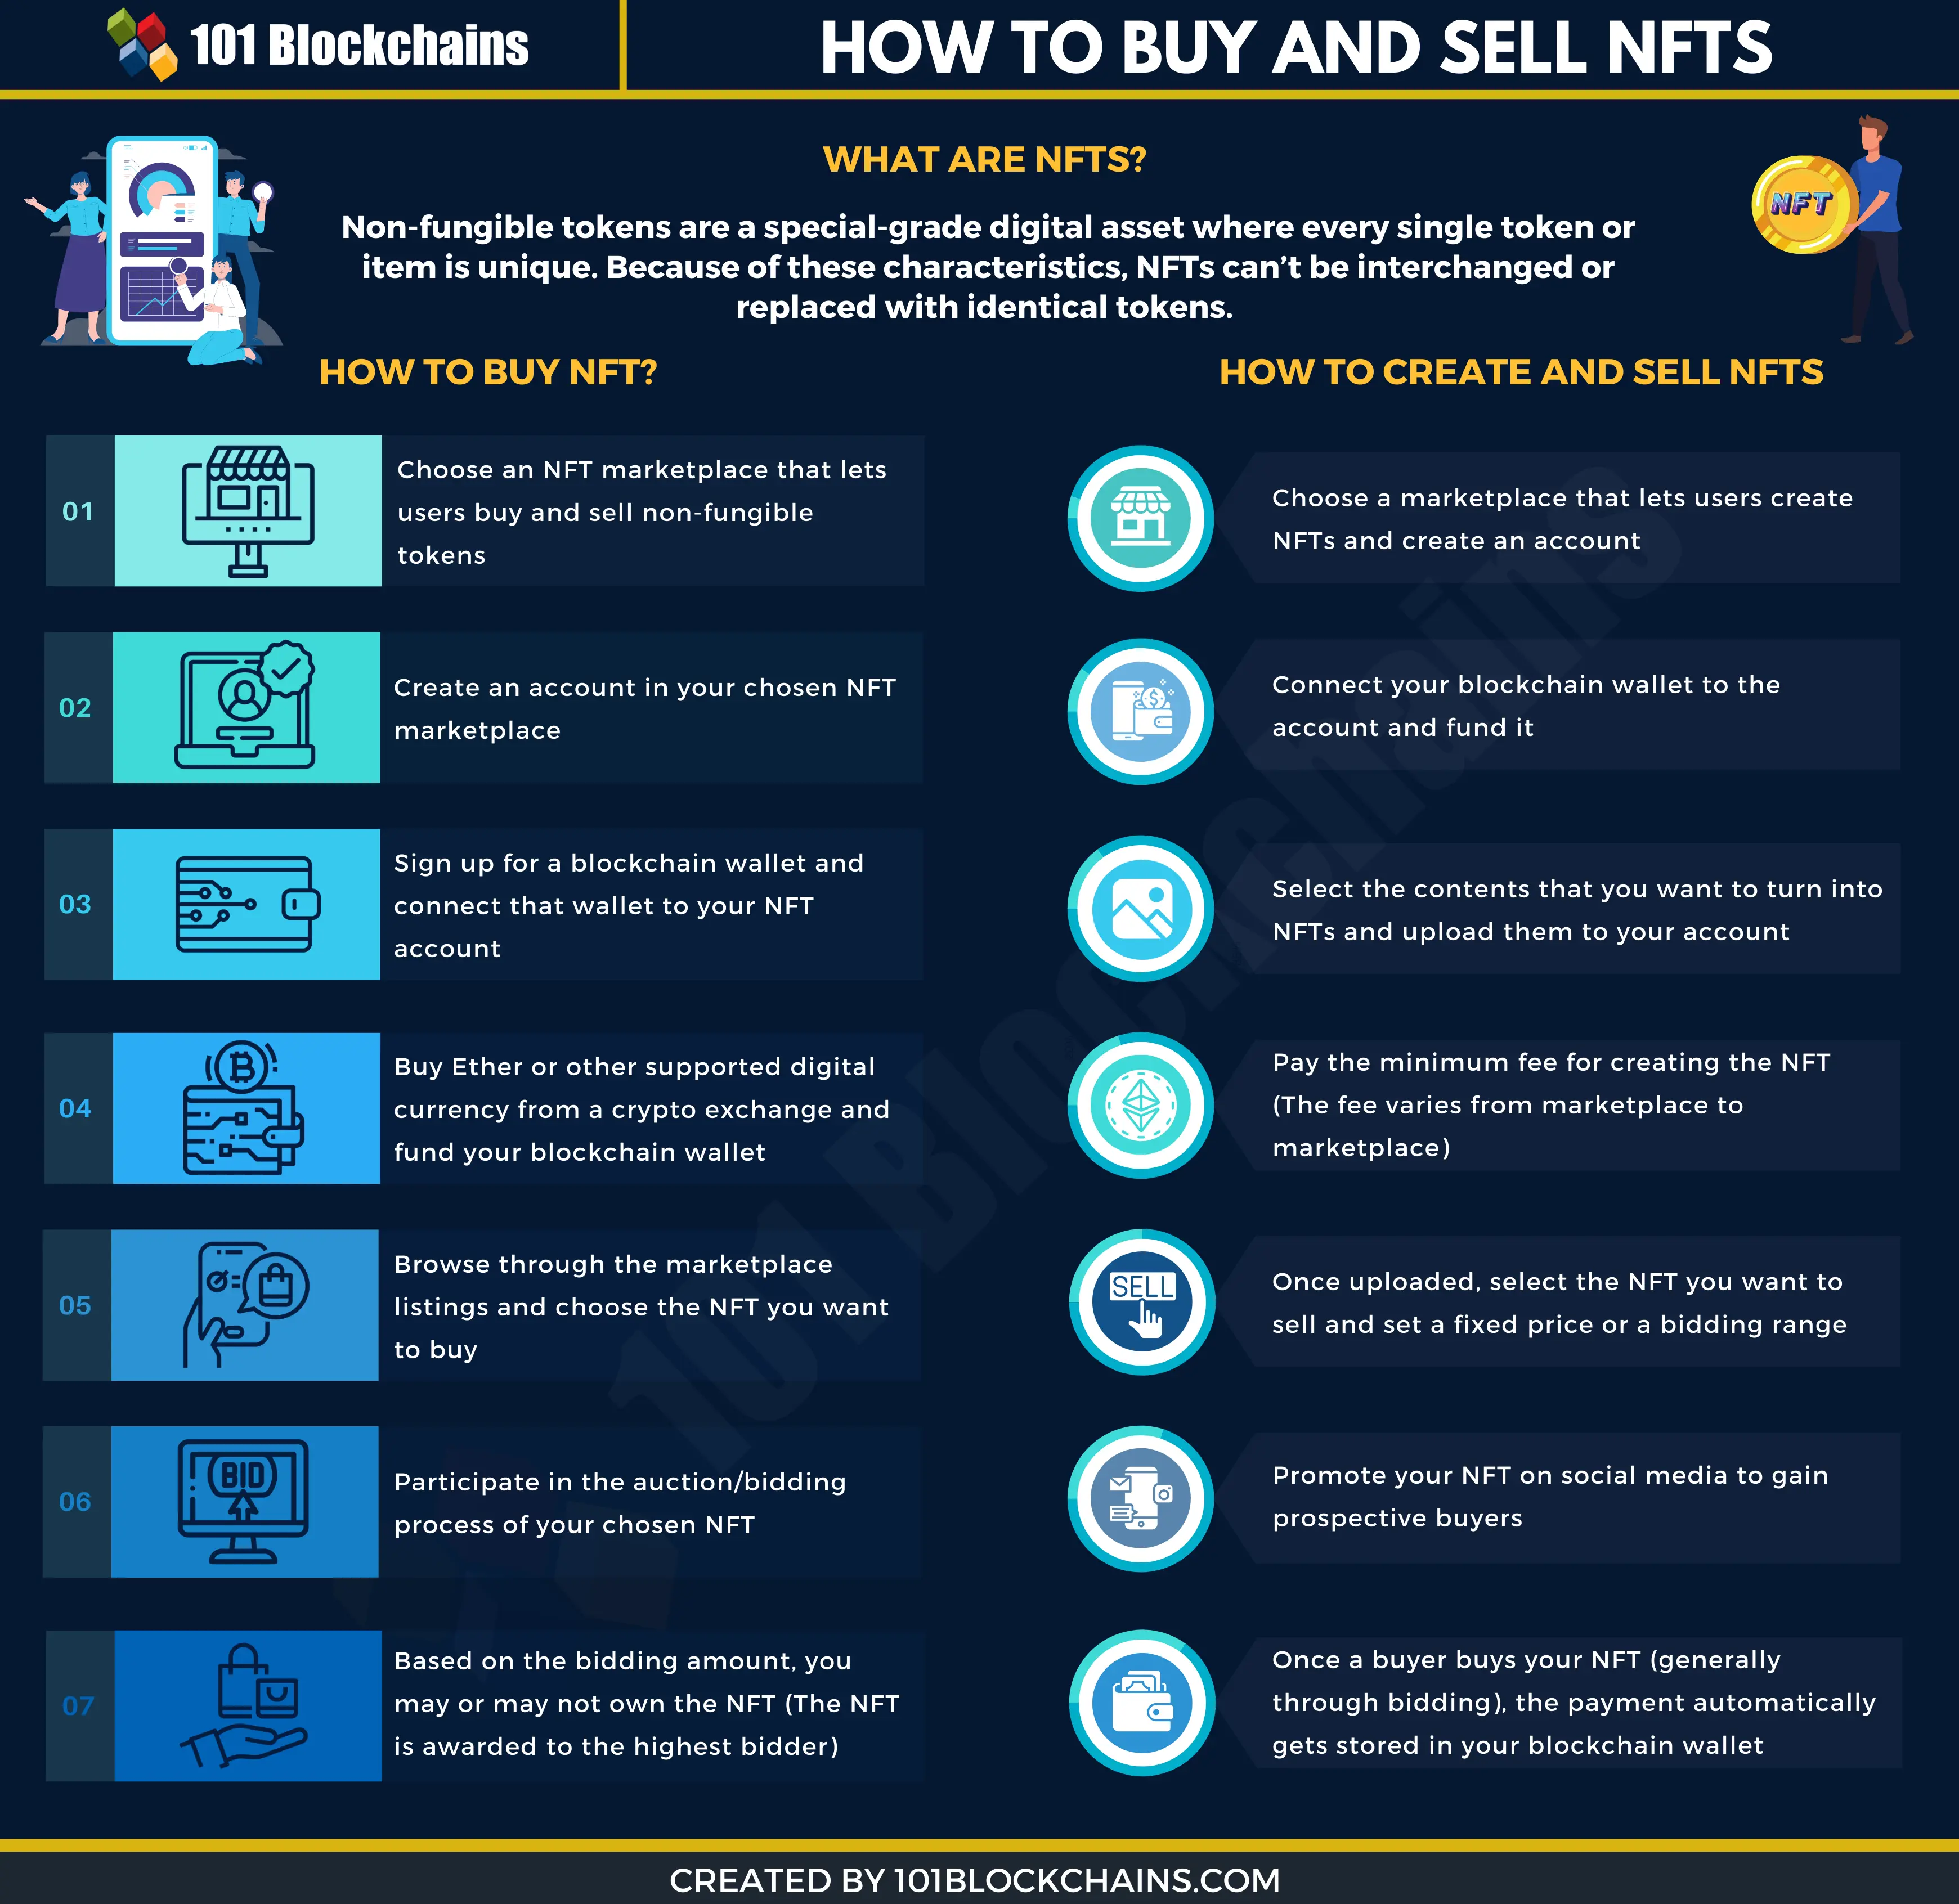 How To Buy And Sell NFTs - 101 Blockchains Guides